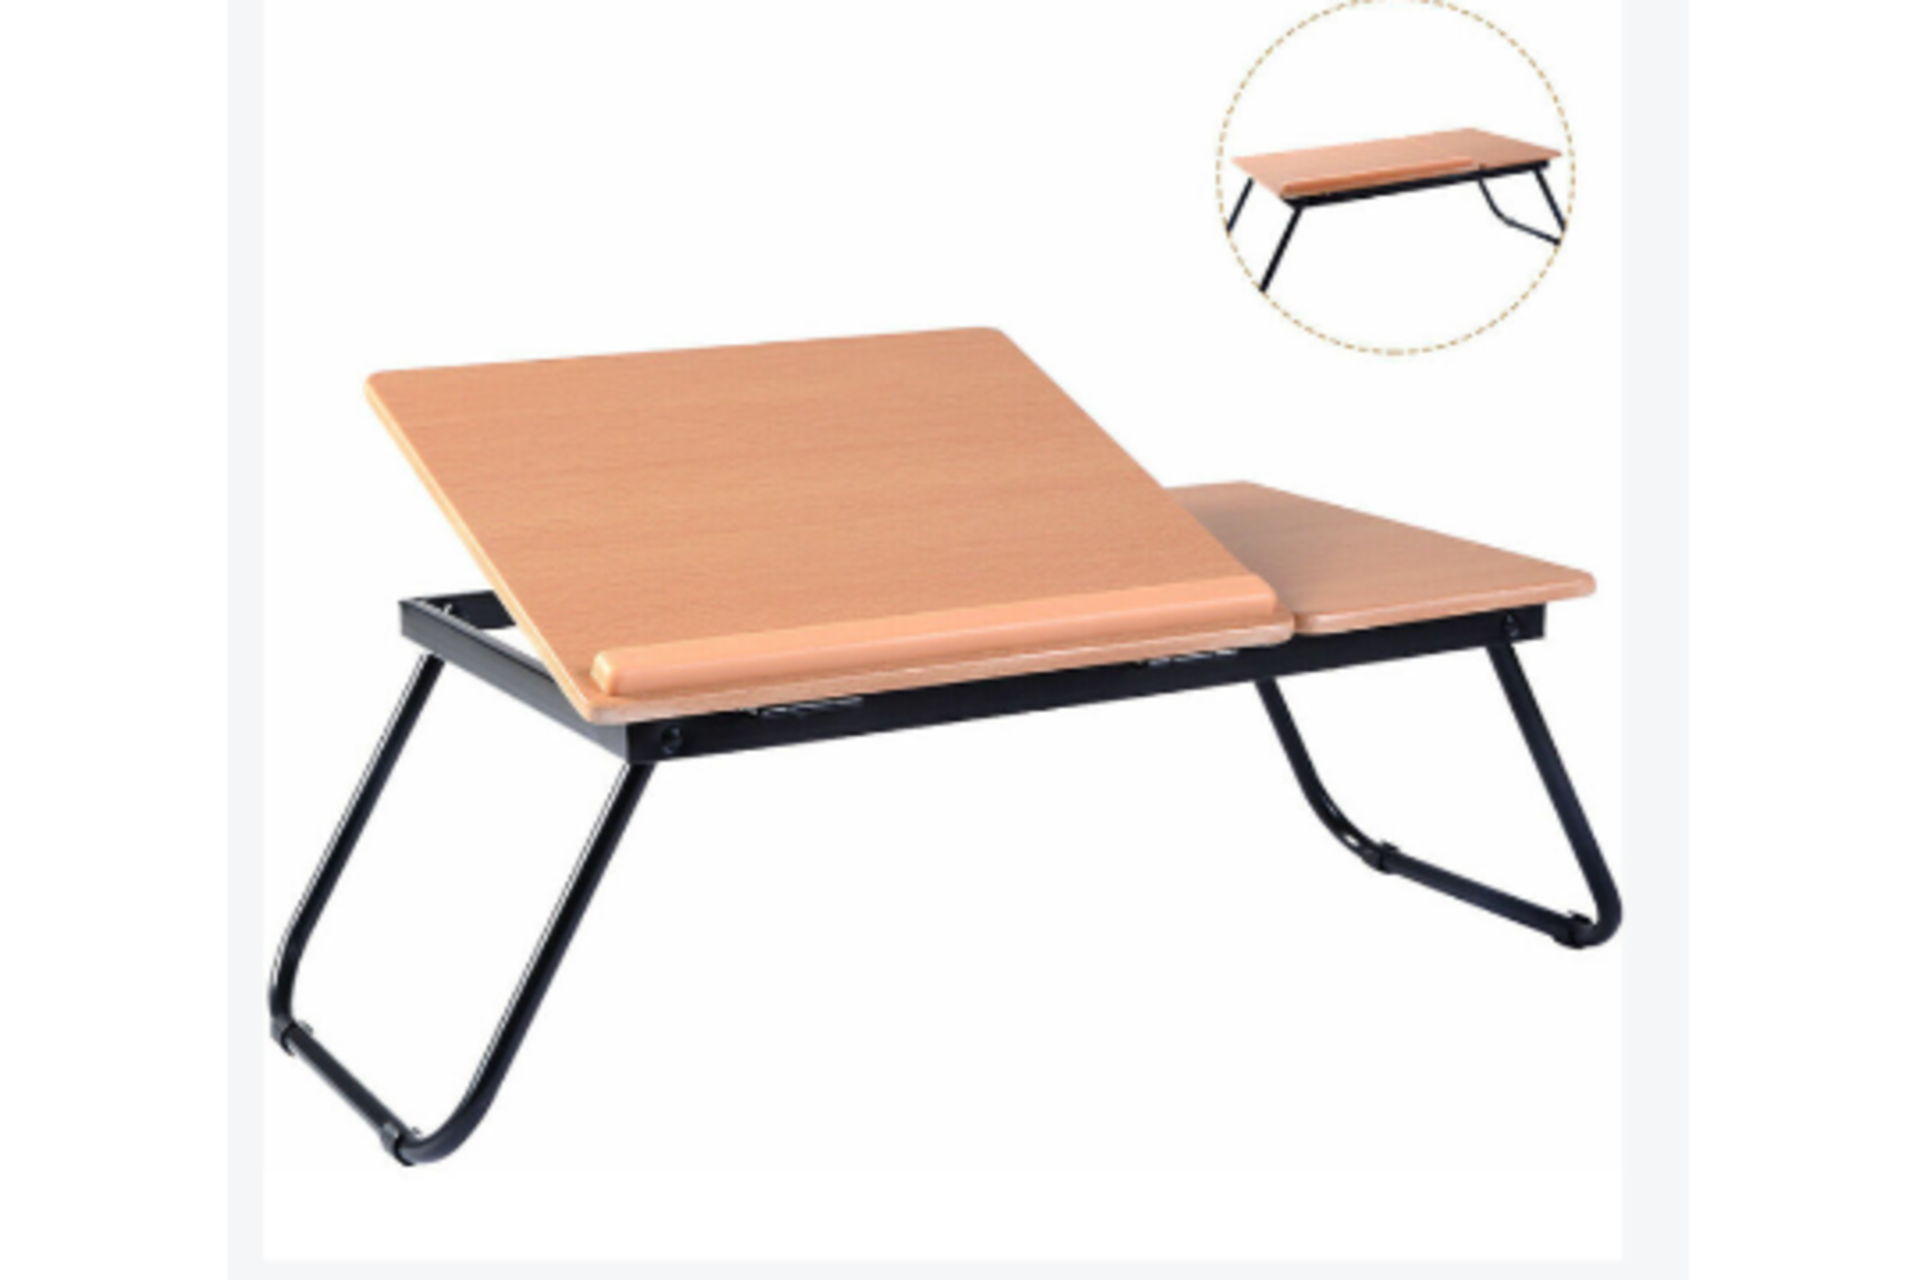 Foldable Laptop Table Notebook Table Portable Dormitory Notebook Stand Lap Desk. - PW. Our bed table